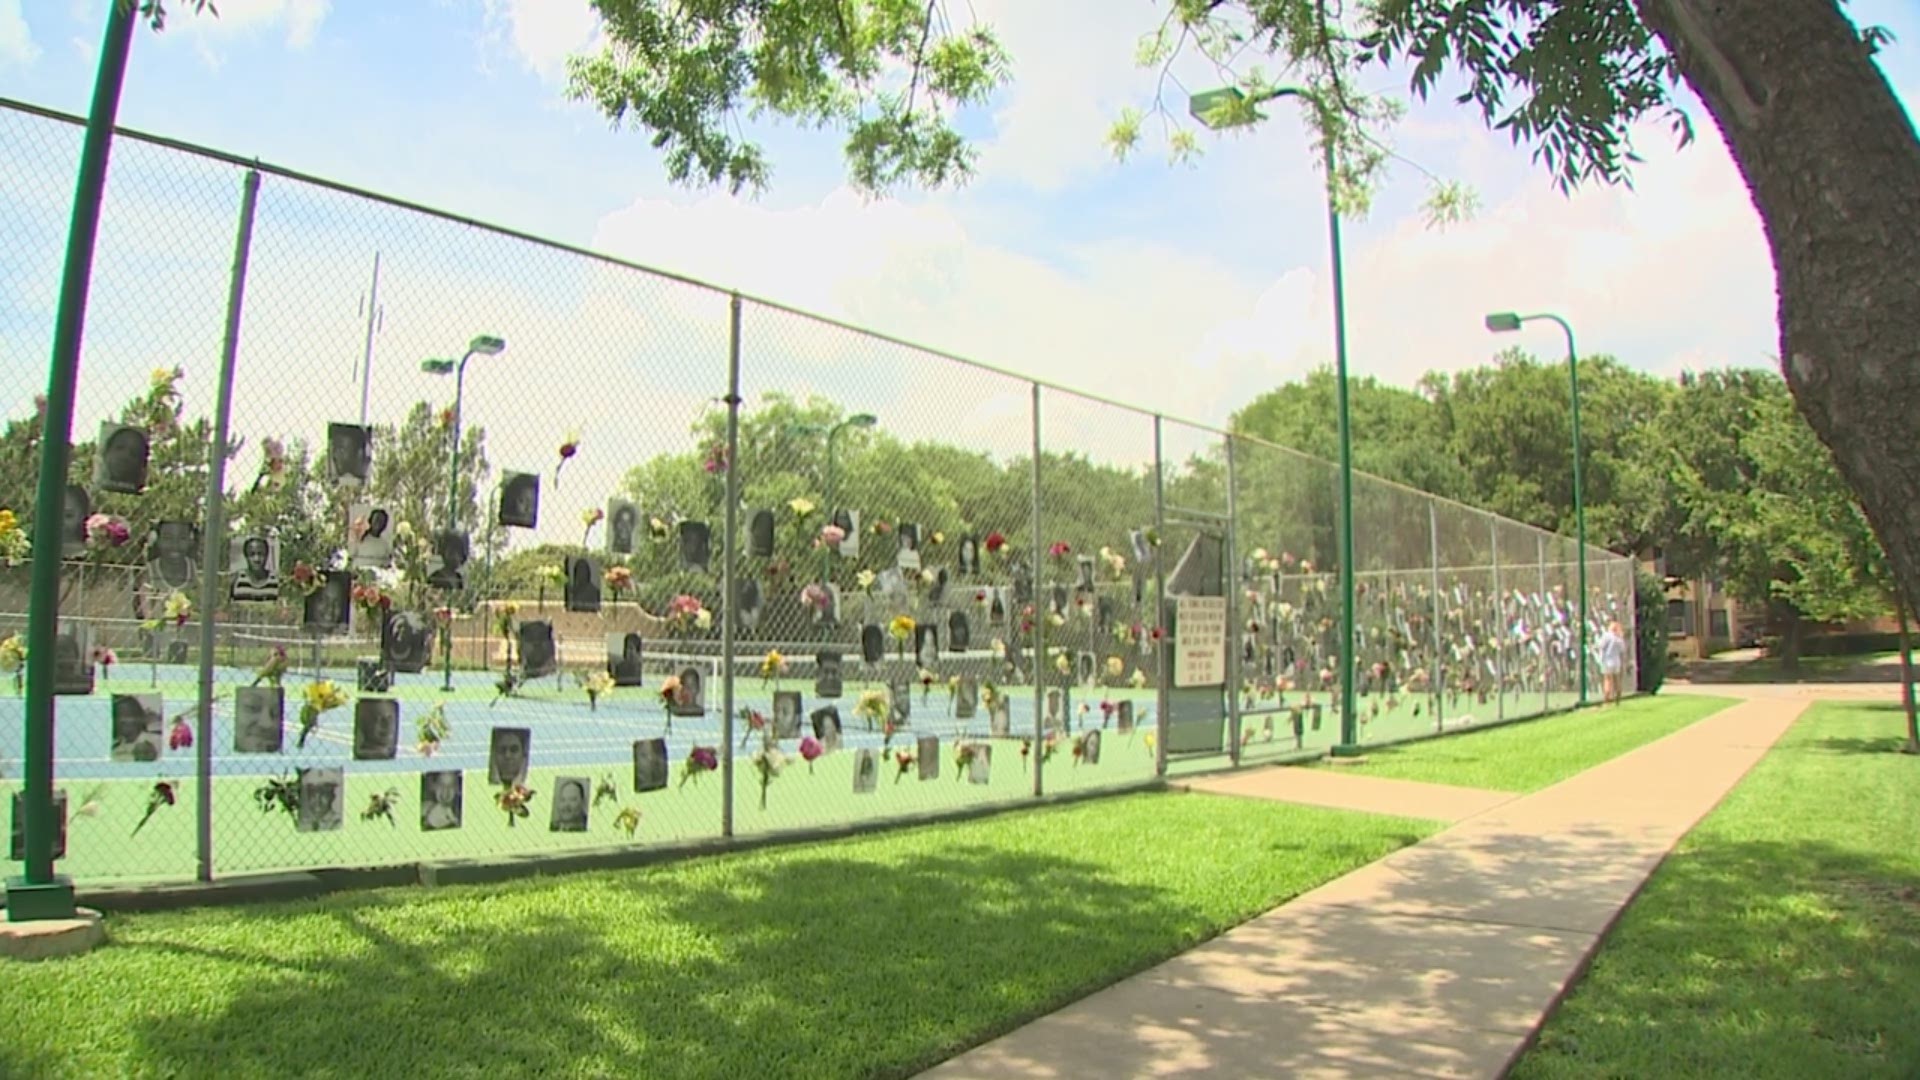 A memorial to honor 'Black lives lost' to violence appeared Thursday morning on a tennis court fence at the City of University Park's Germany Park.